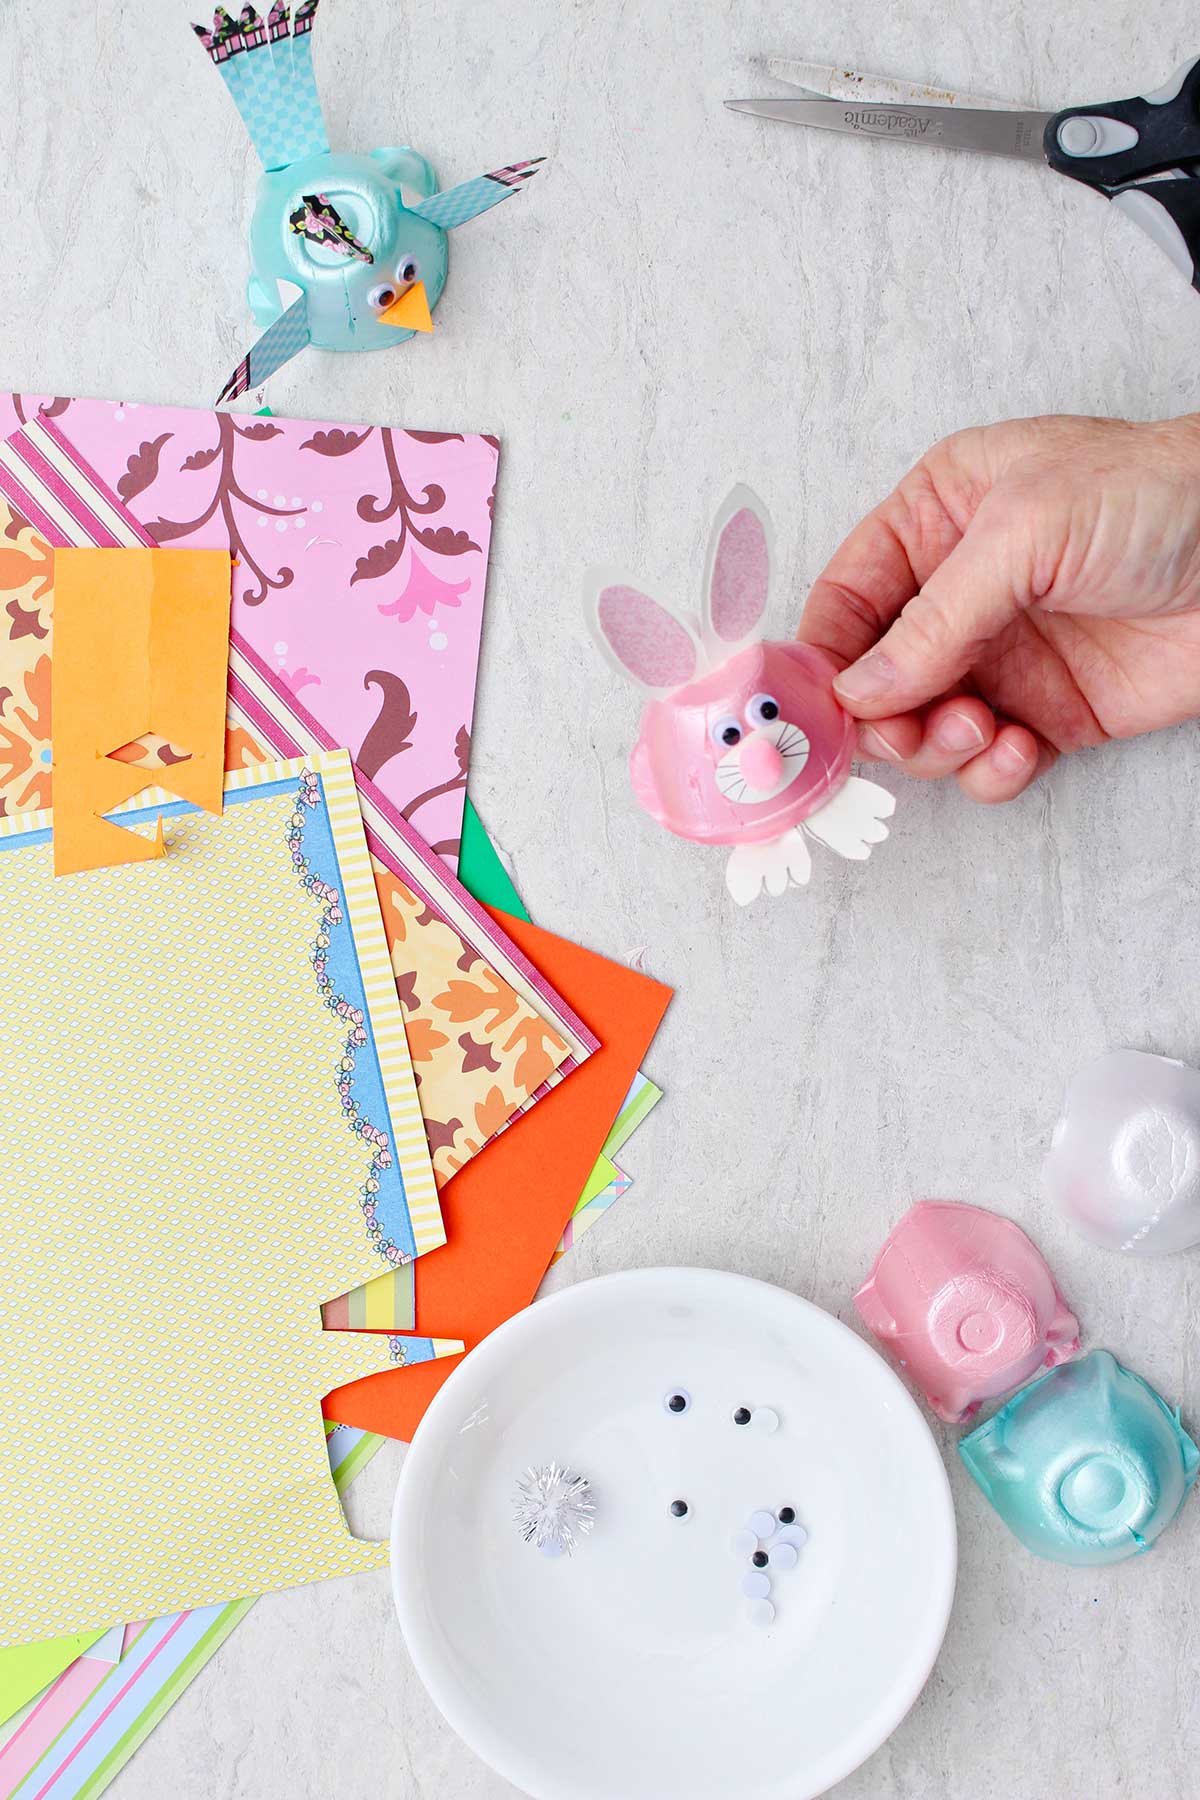 Hand holding pink bunny egg carton animal with other scraps of colorful paper and egg carton animals near by.